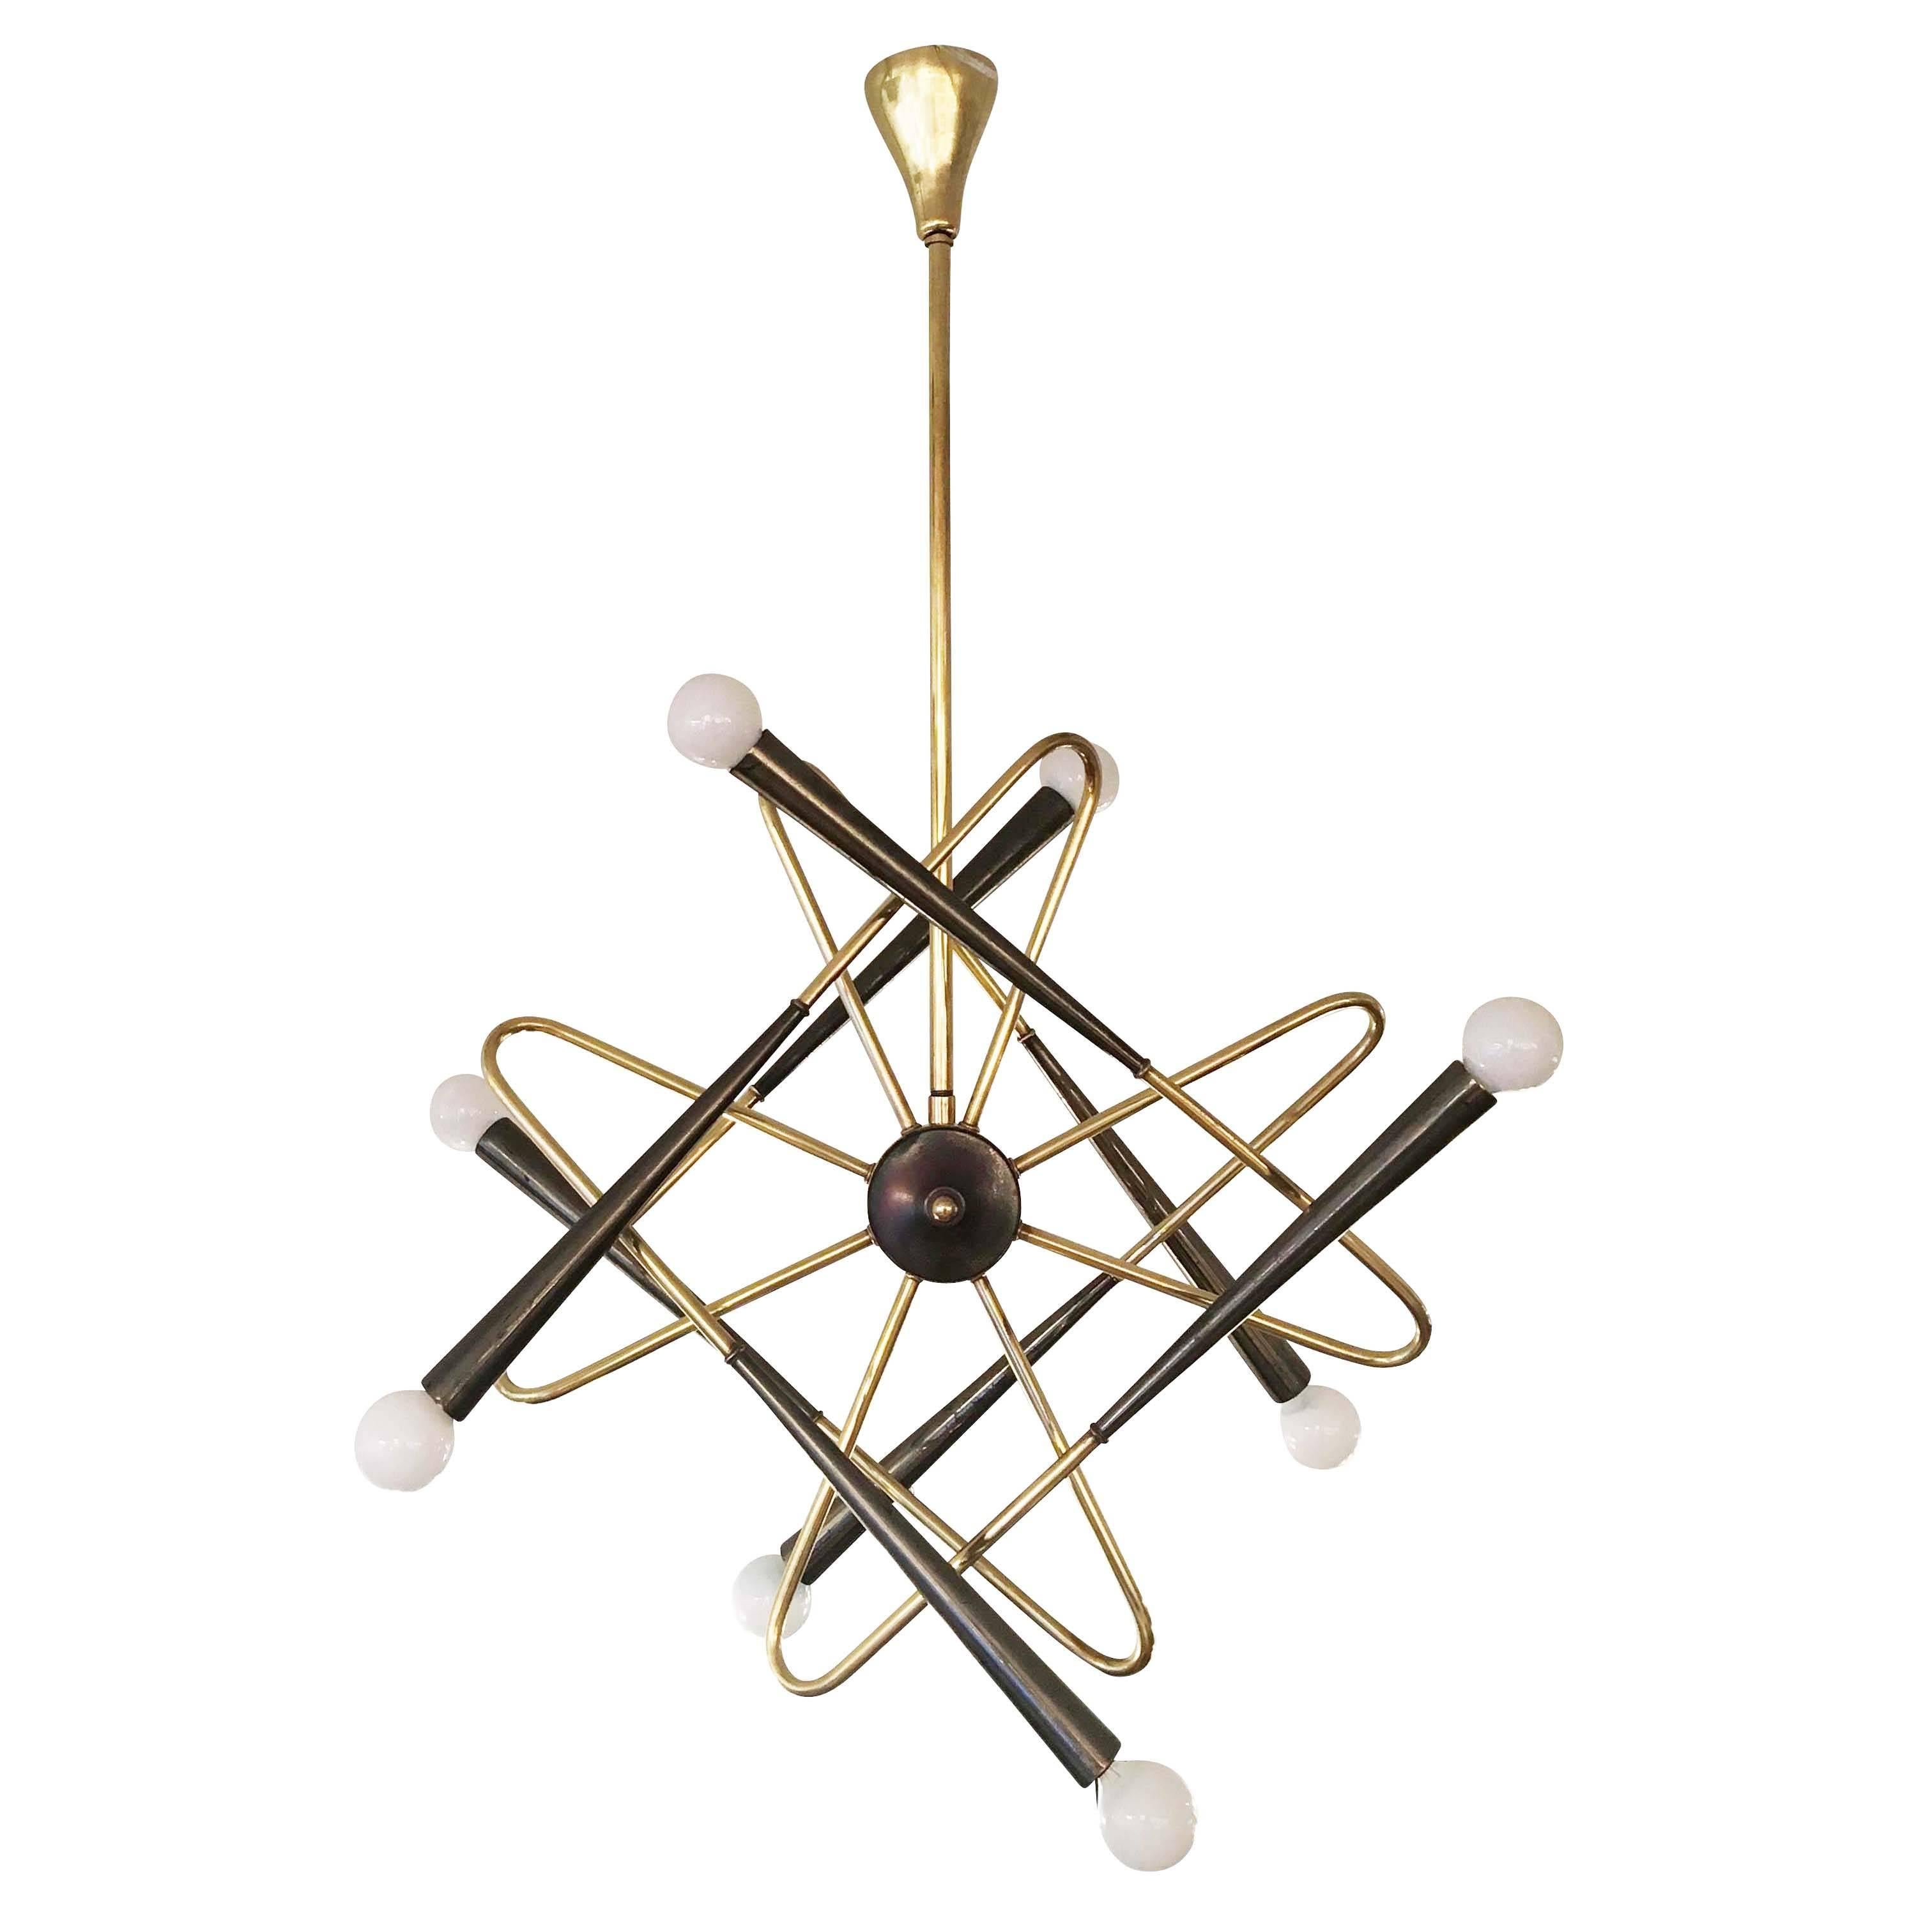 Rare Stilnovo attributed brass chandelier featuring eight bent arms terminating in gray conical shades. The arms create a beautiful illusion of movement.
 